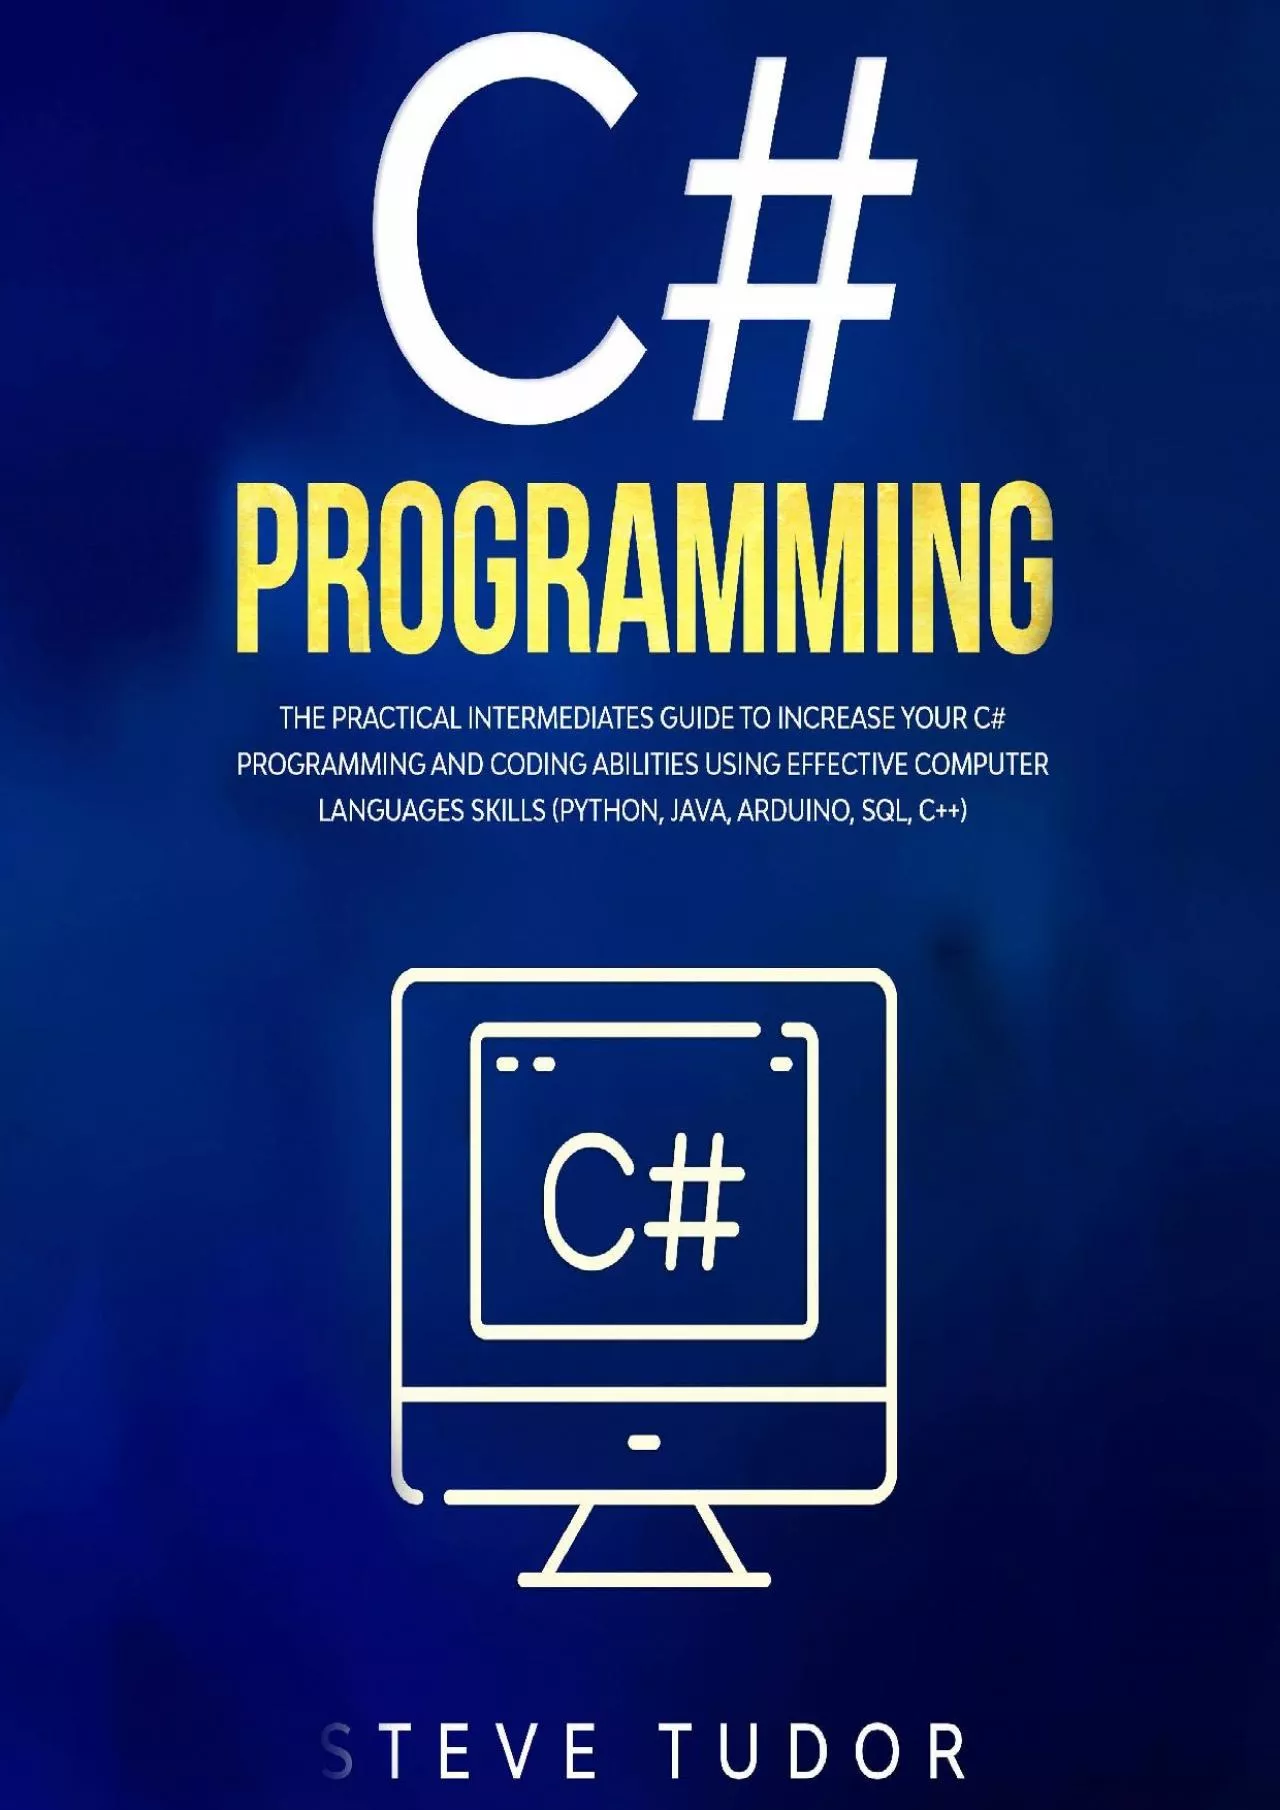 [BEST]-C: The Practical Intermediates Guide To Increase Your C Programming And Coding